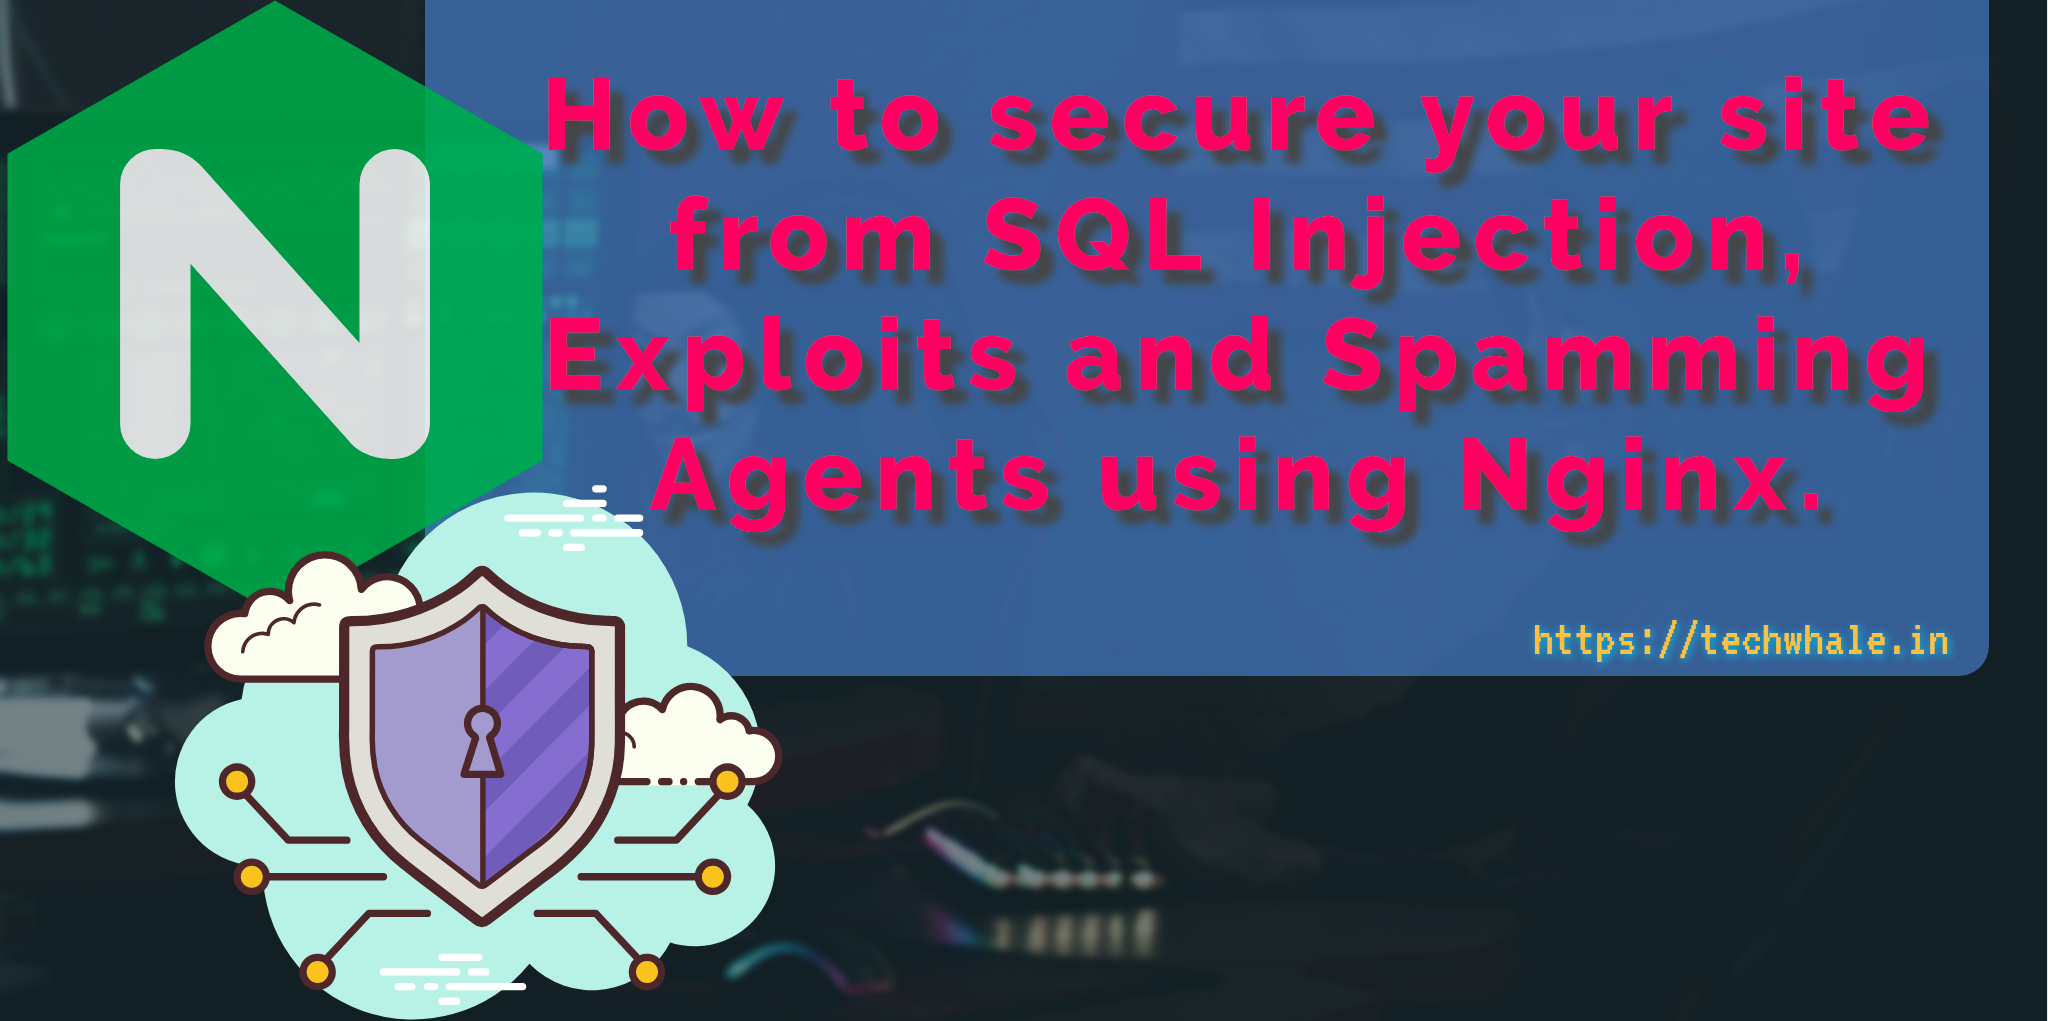 nginx securing configuration for attacker using SQL injection, File Injection, SPAM and User Agents